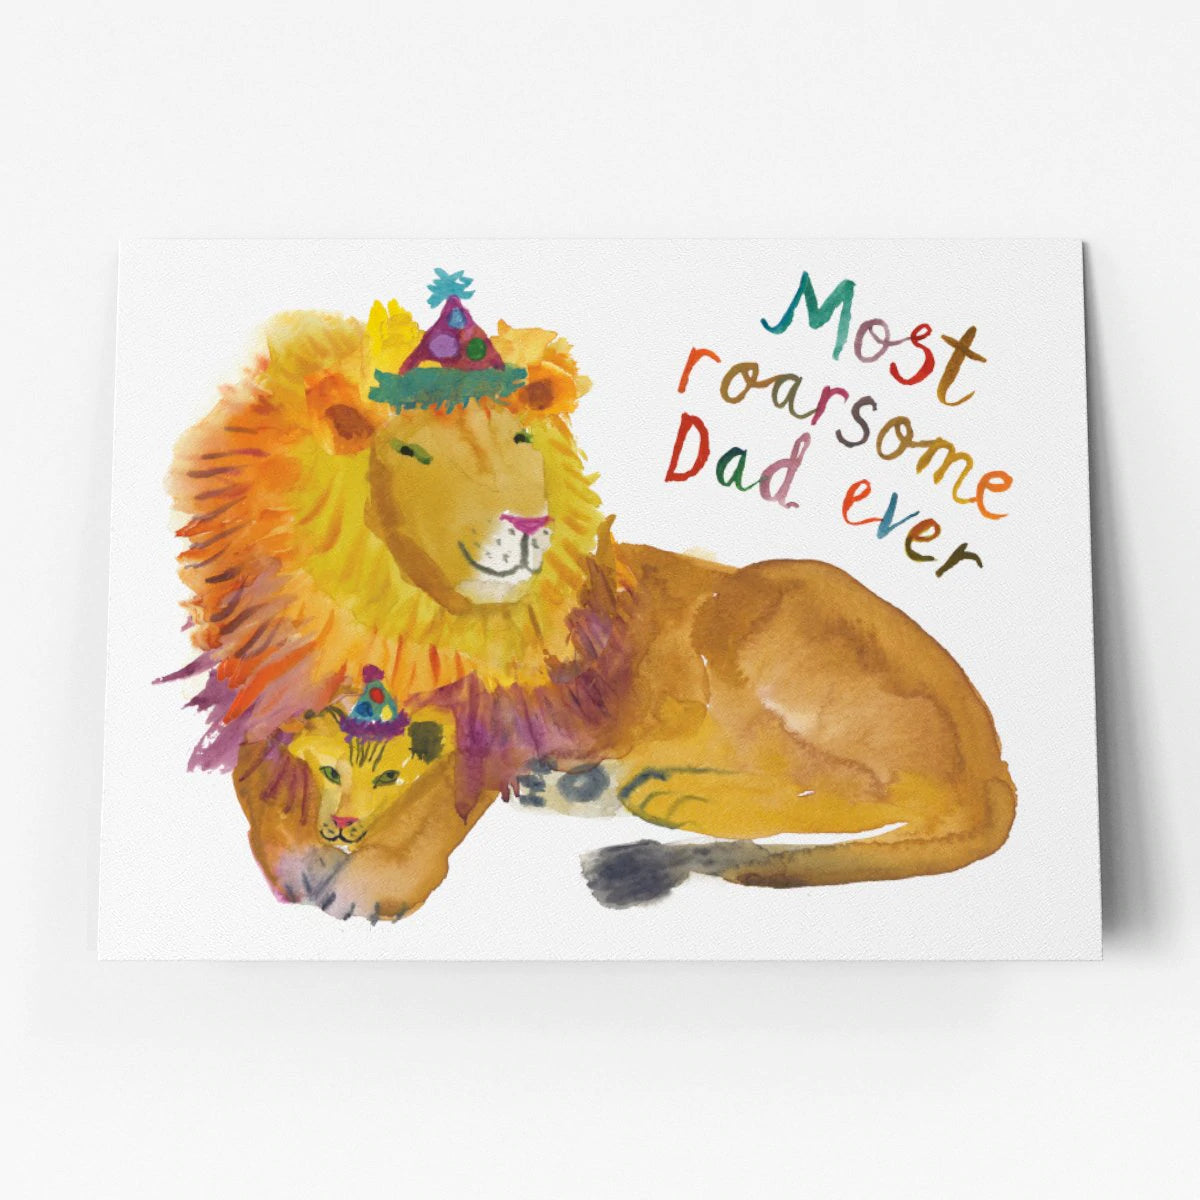 Dad You Are Roarsome Father's Day Card – Evercarts